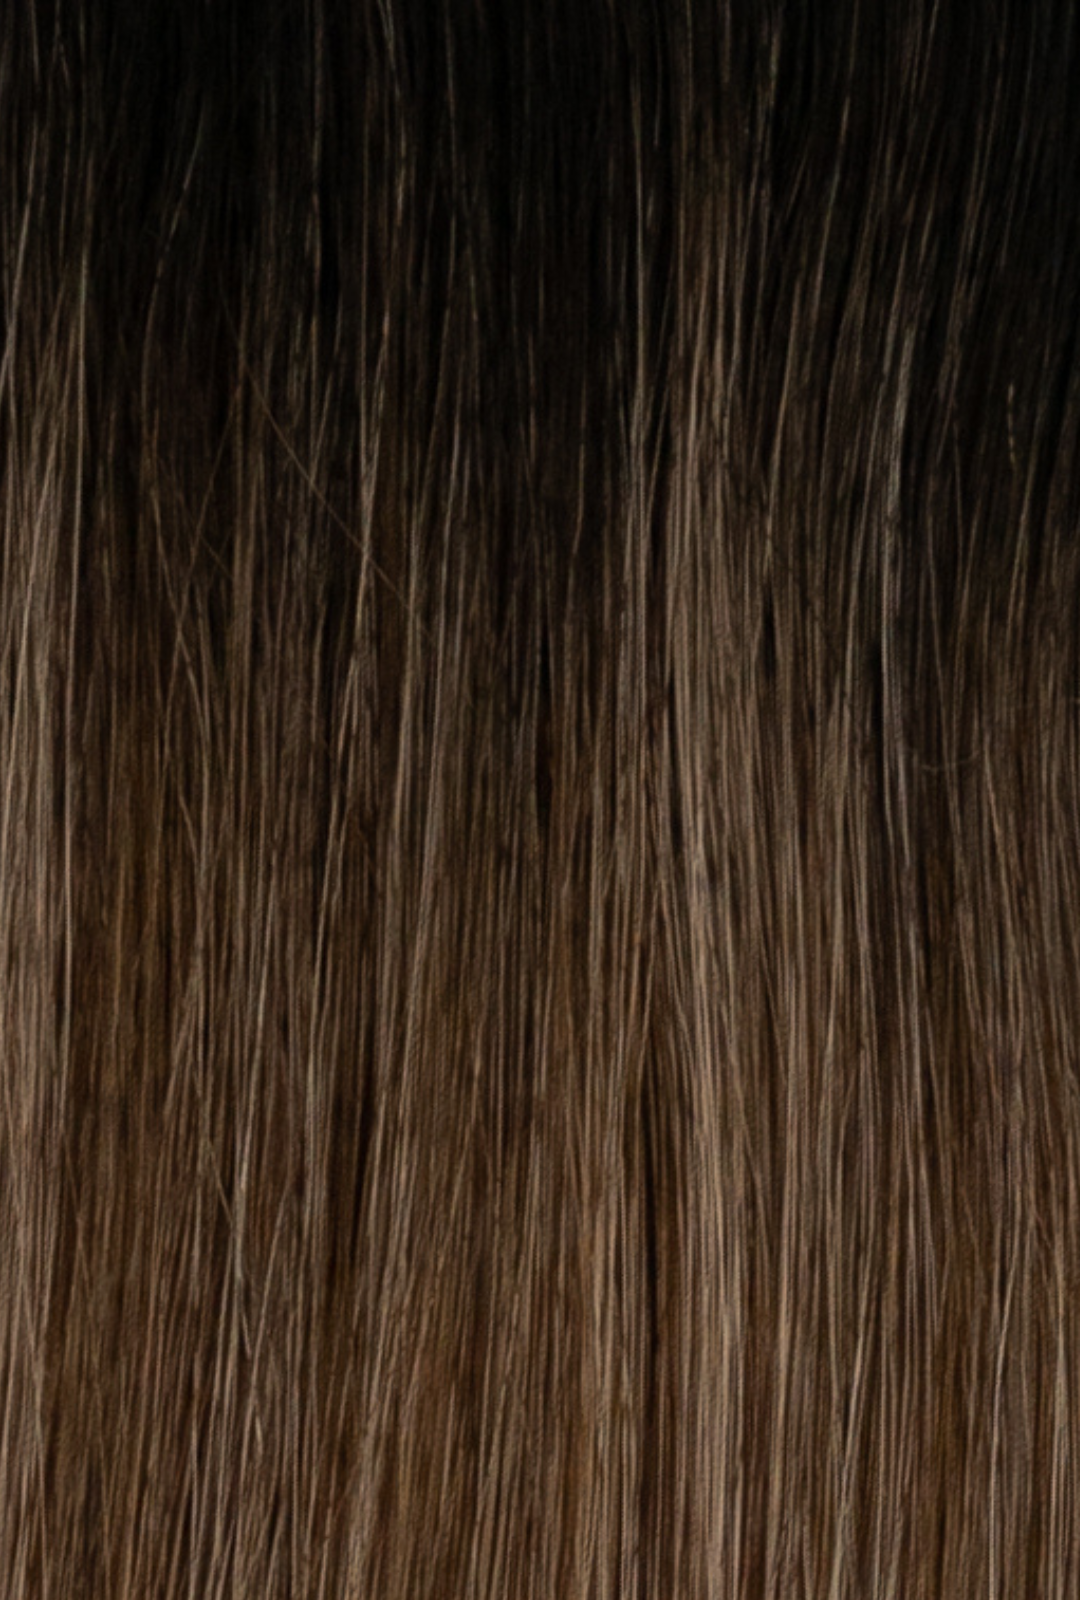 Laced Hair Keratin Bond Extensions Rooted #1B/D4/8